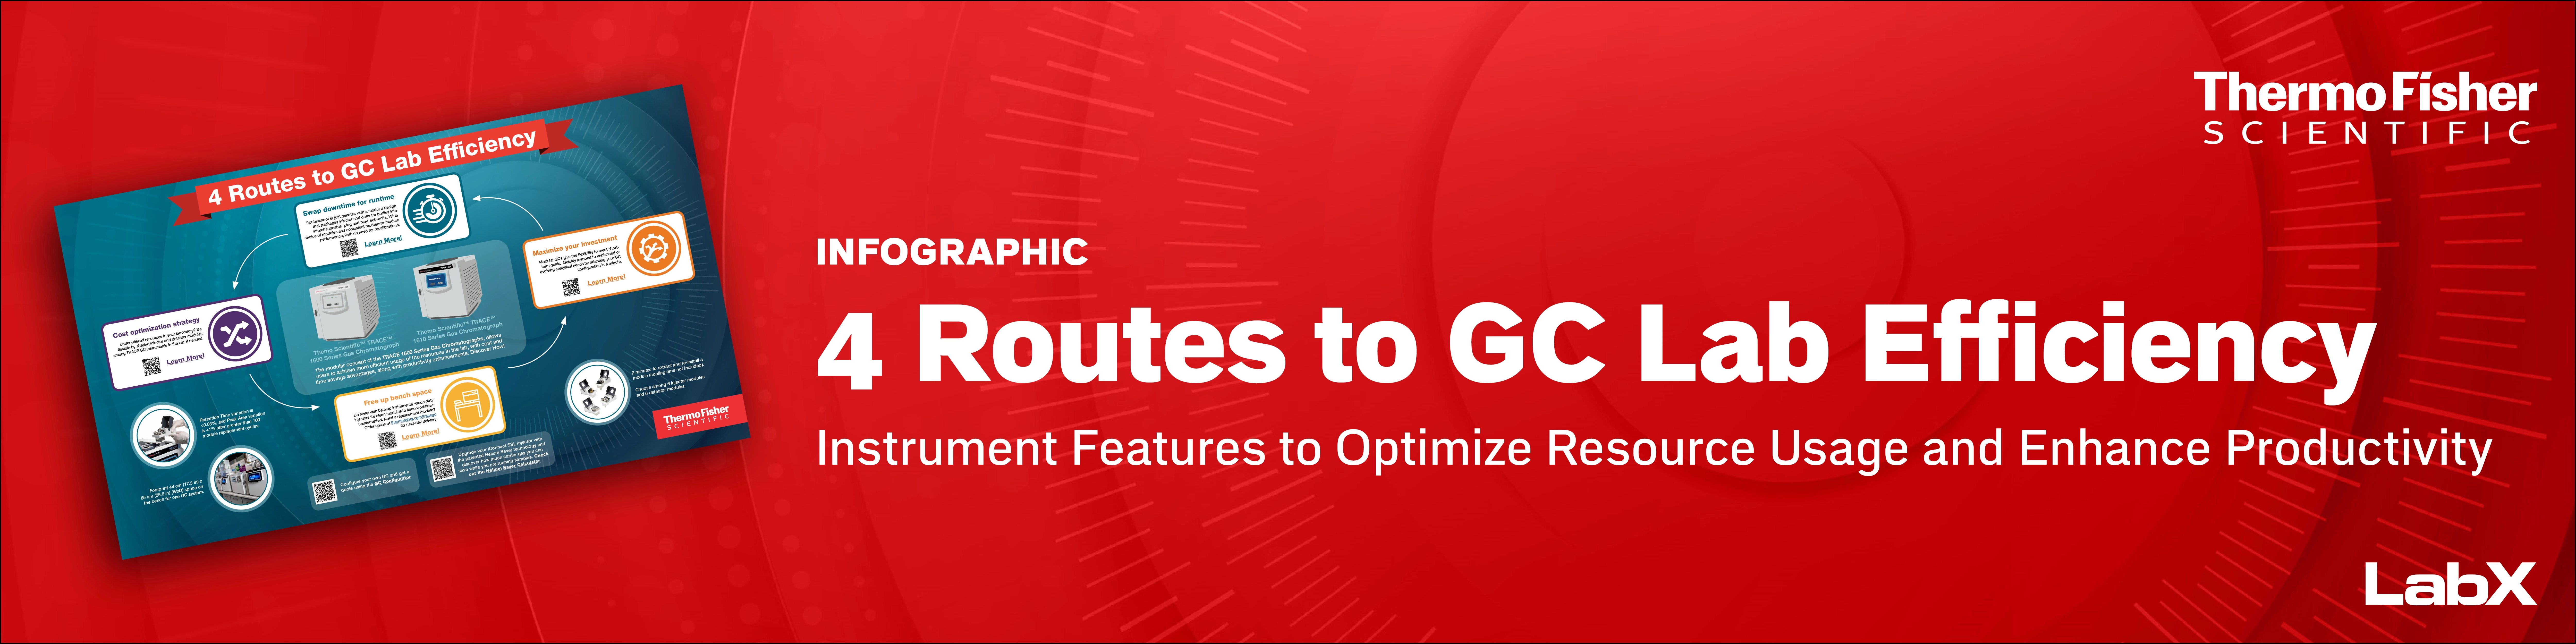 Thermo 4 Routes GC Efficiency Infographic